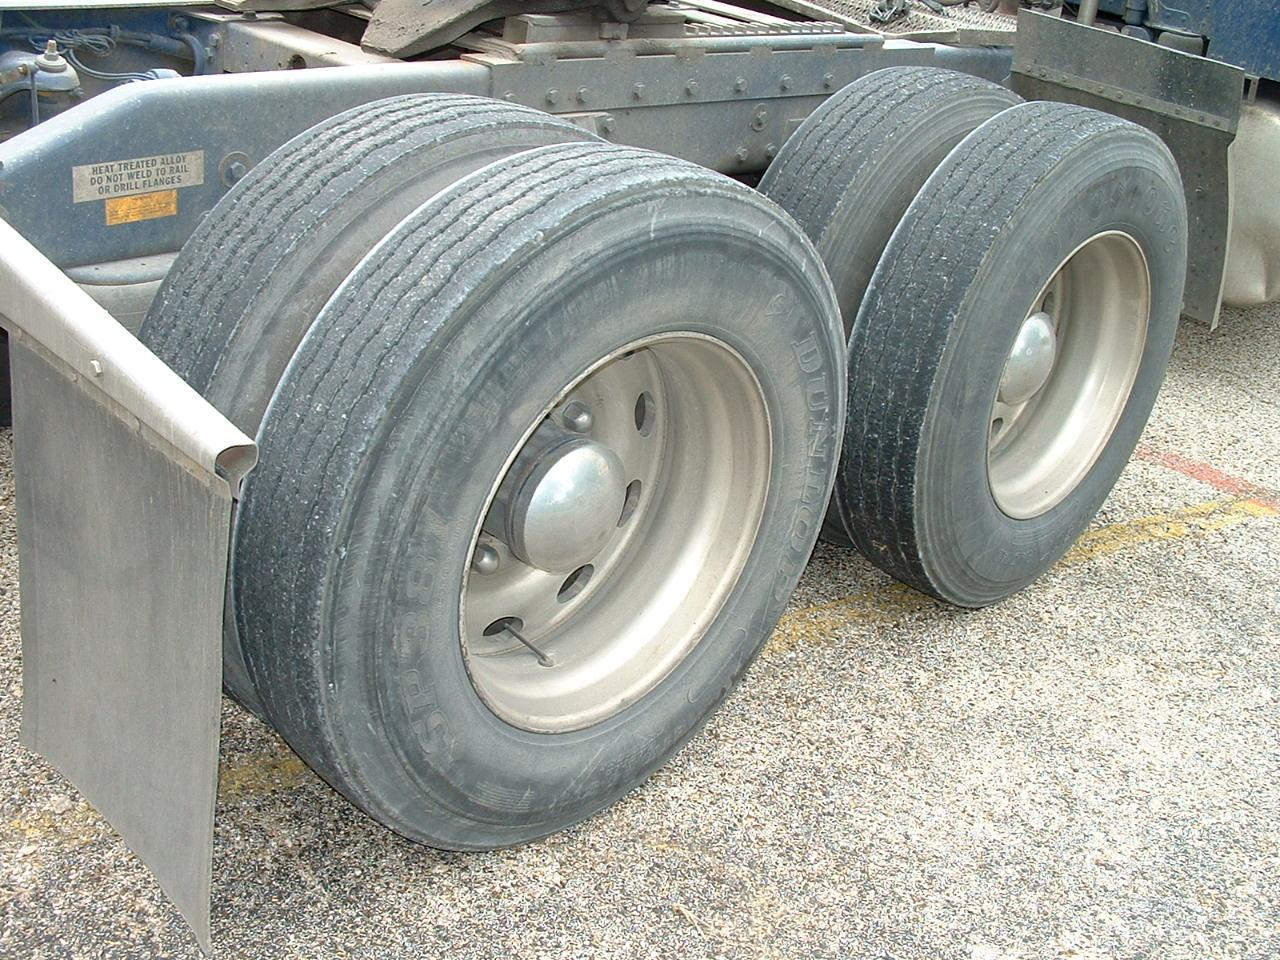 Tires are one of the components of a pre-trip inspection and must be inspected over the course of the day.